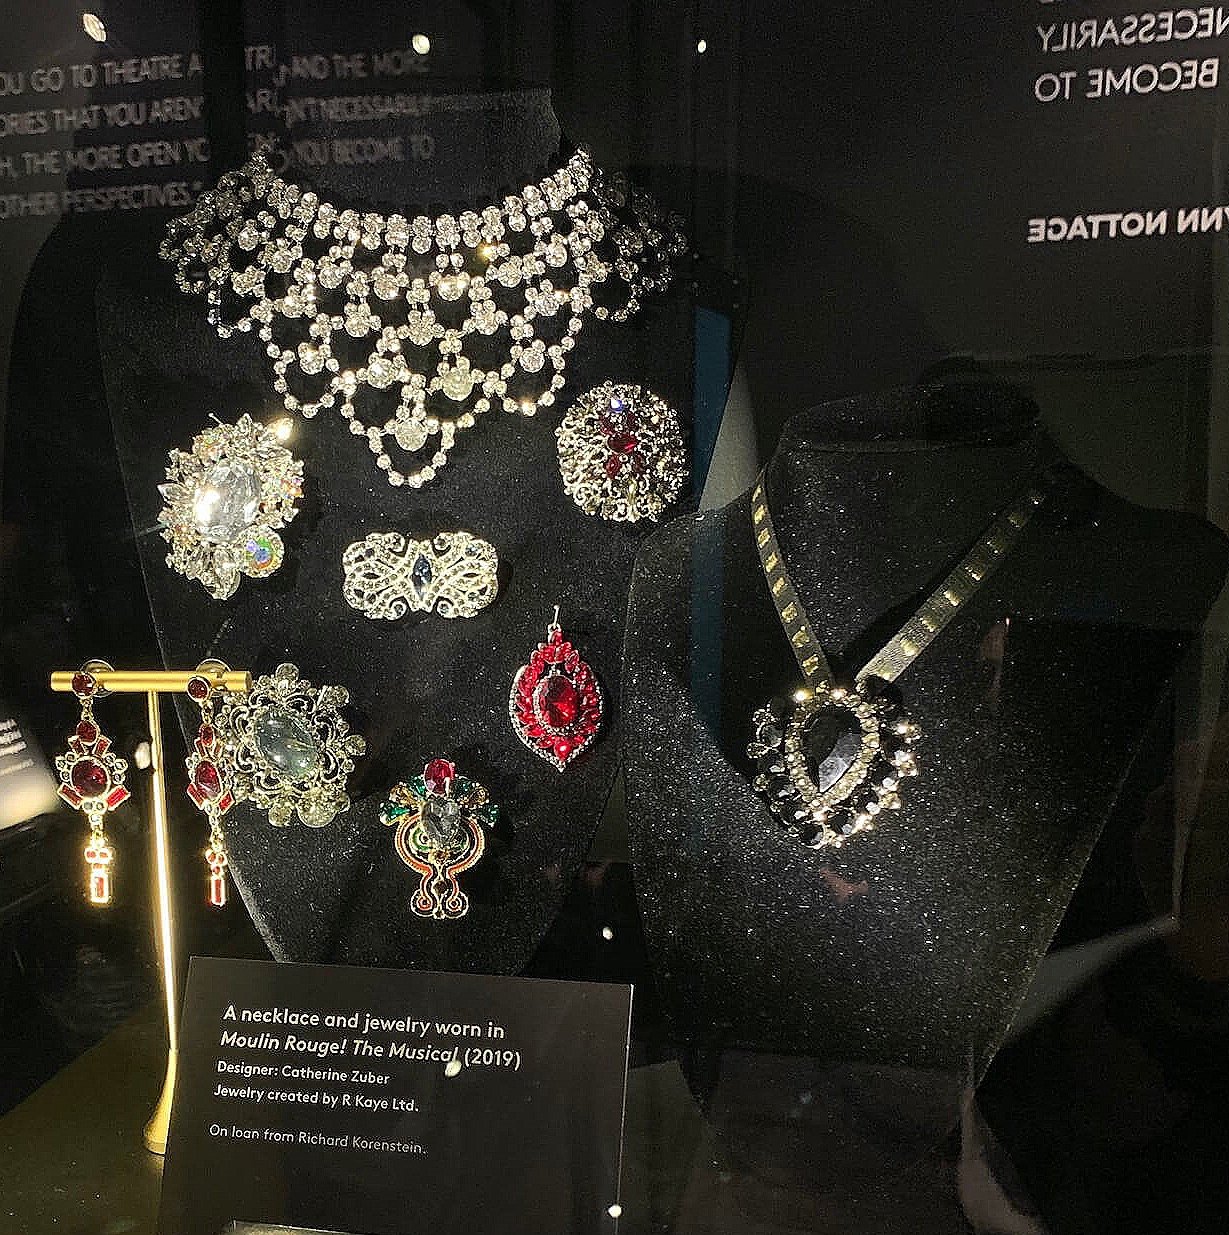  Jewelry worn in  Moulin Rouge! The Musical   Designed by Catherine Zuber 